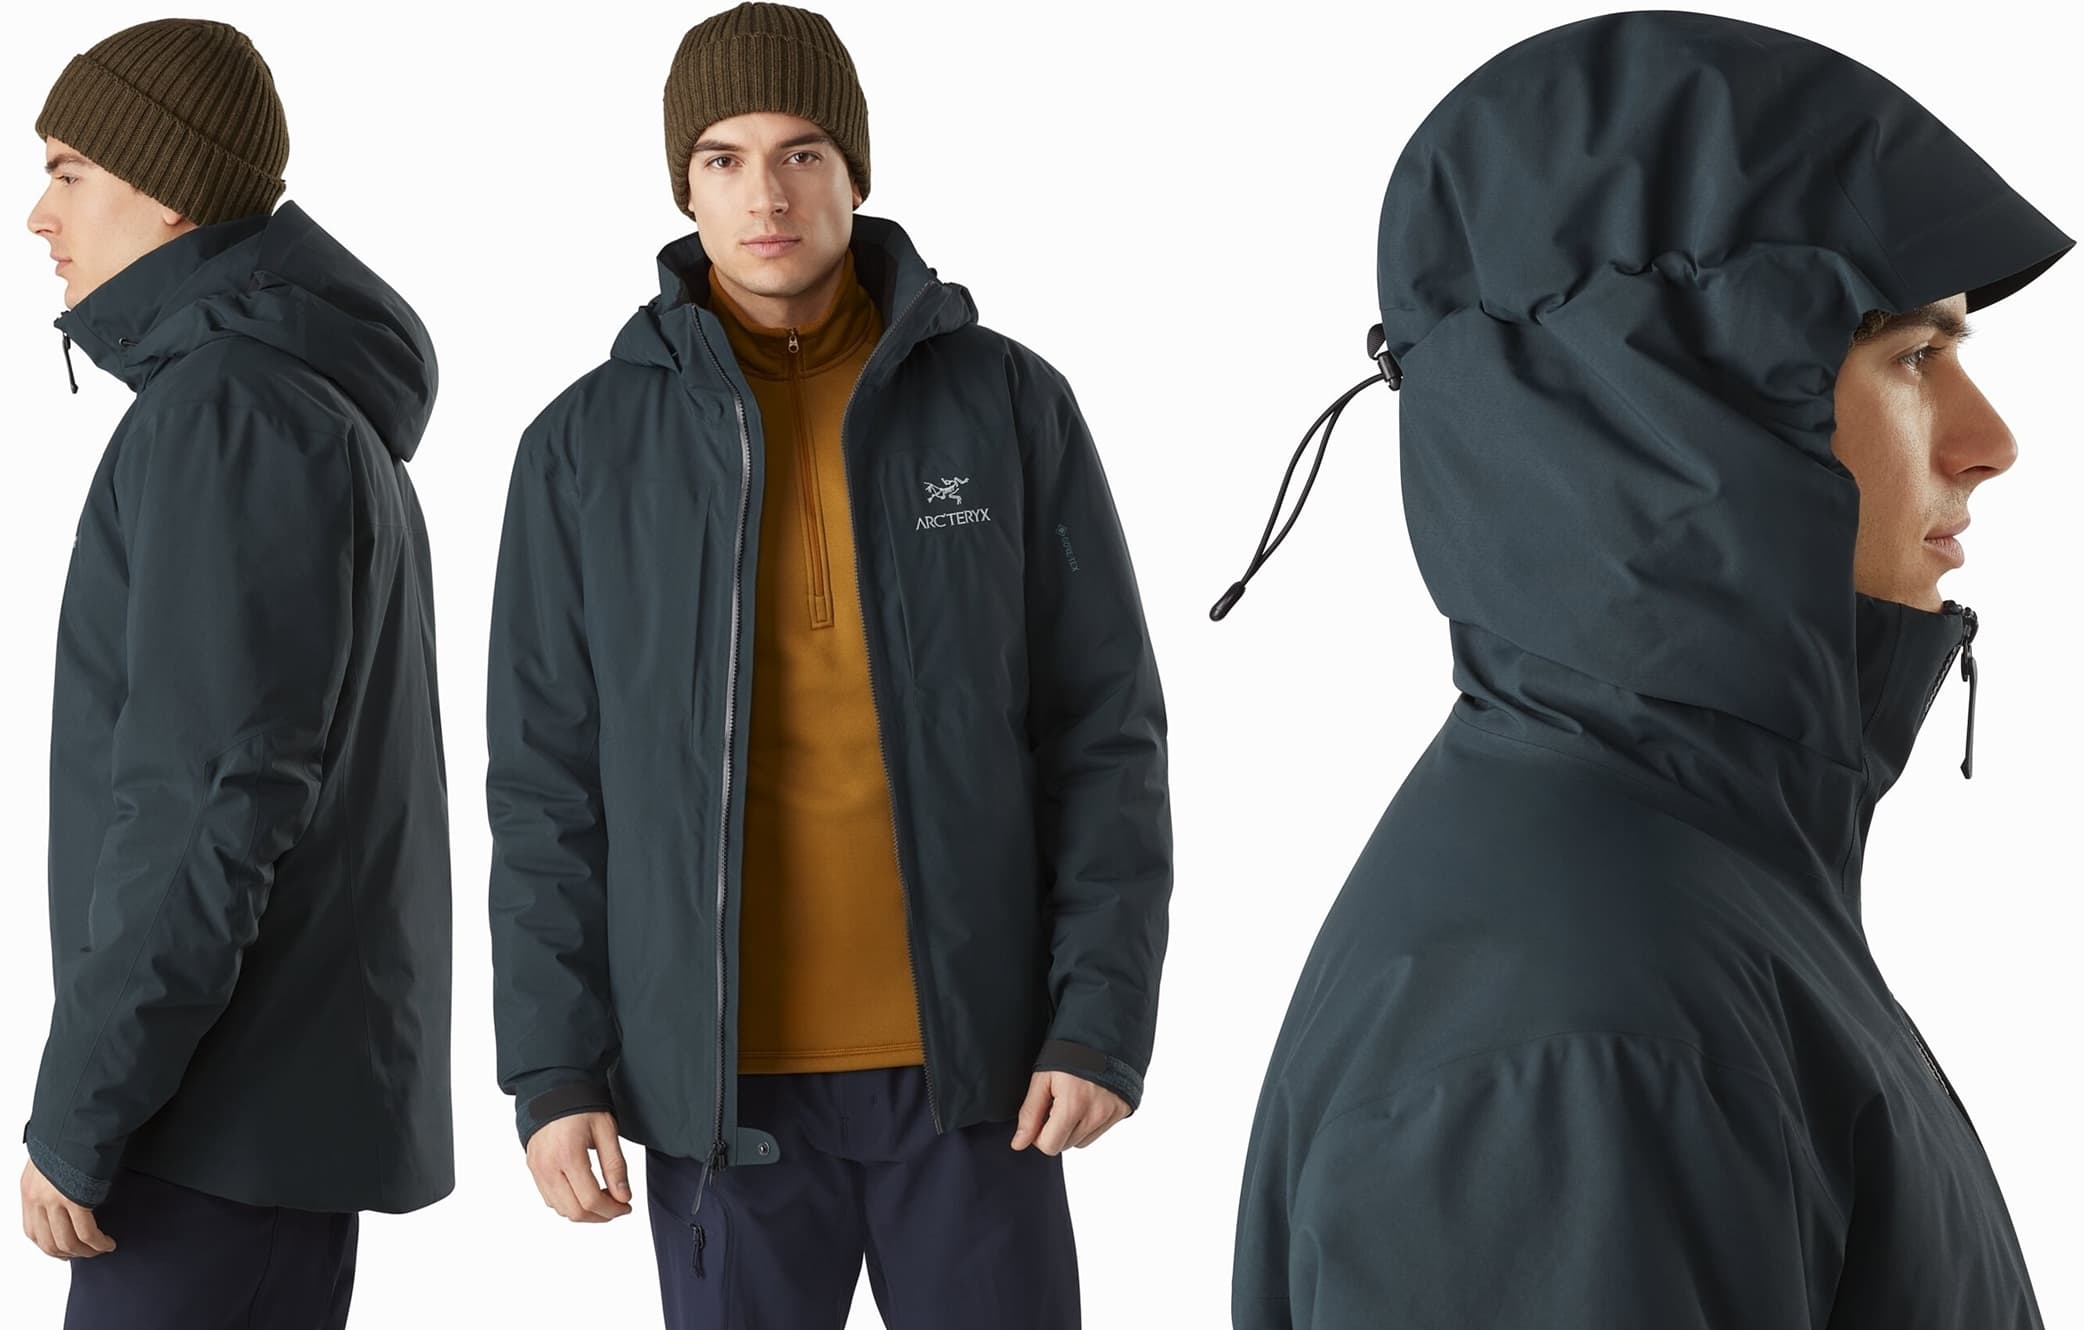 The warmest fully waterproof rain jacket in the Arc'teryx Essentials collection